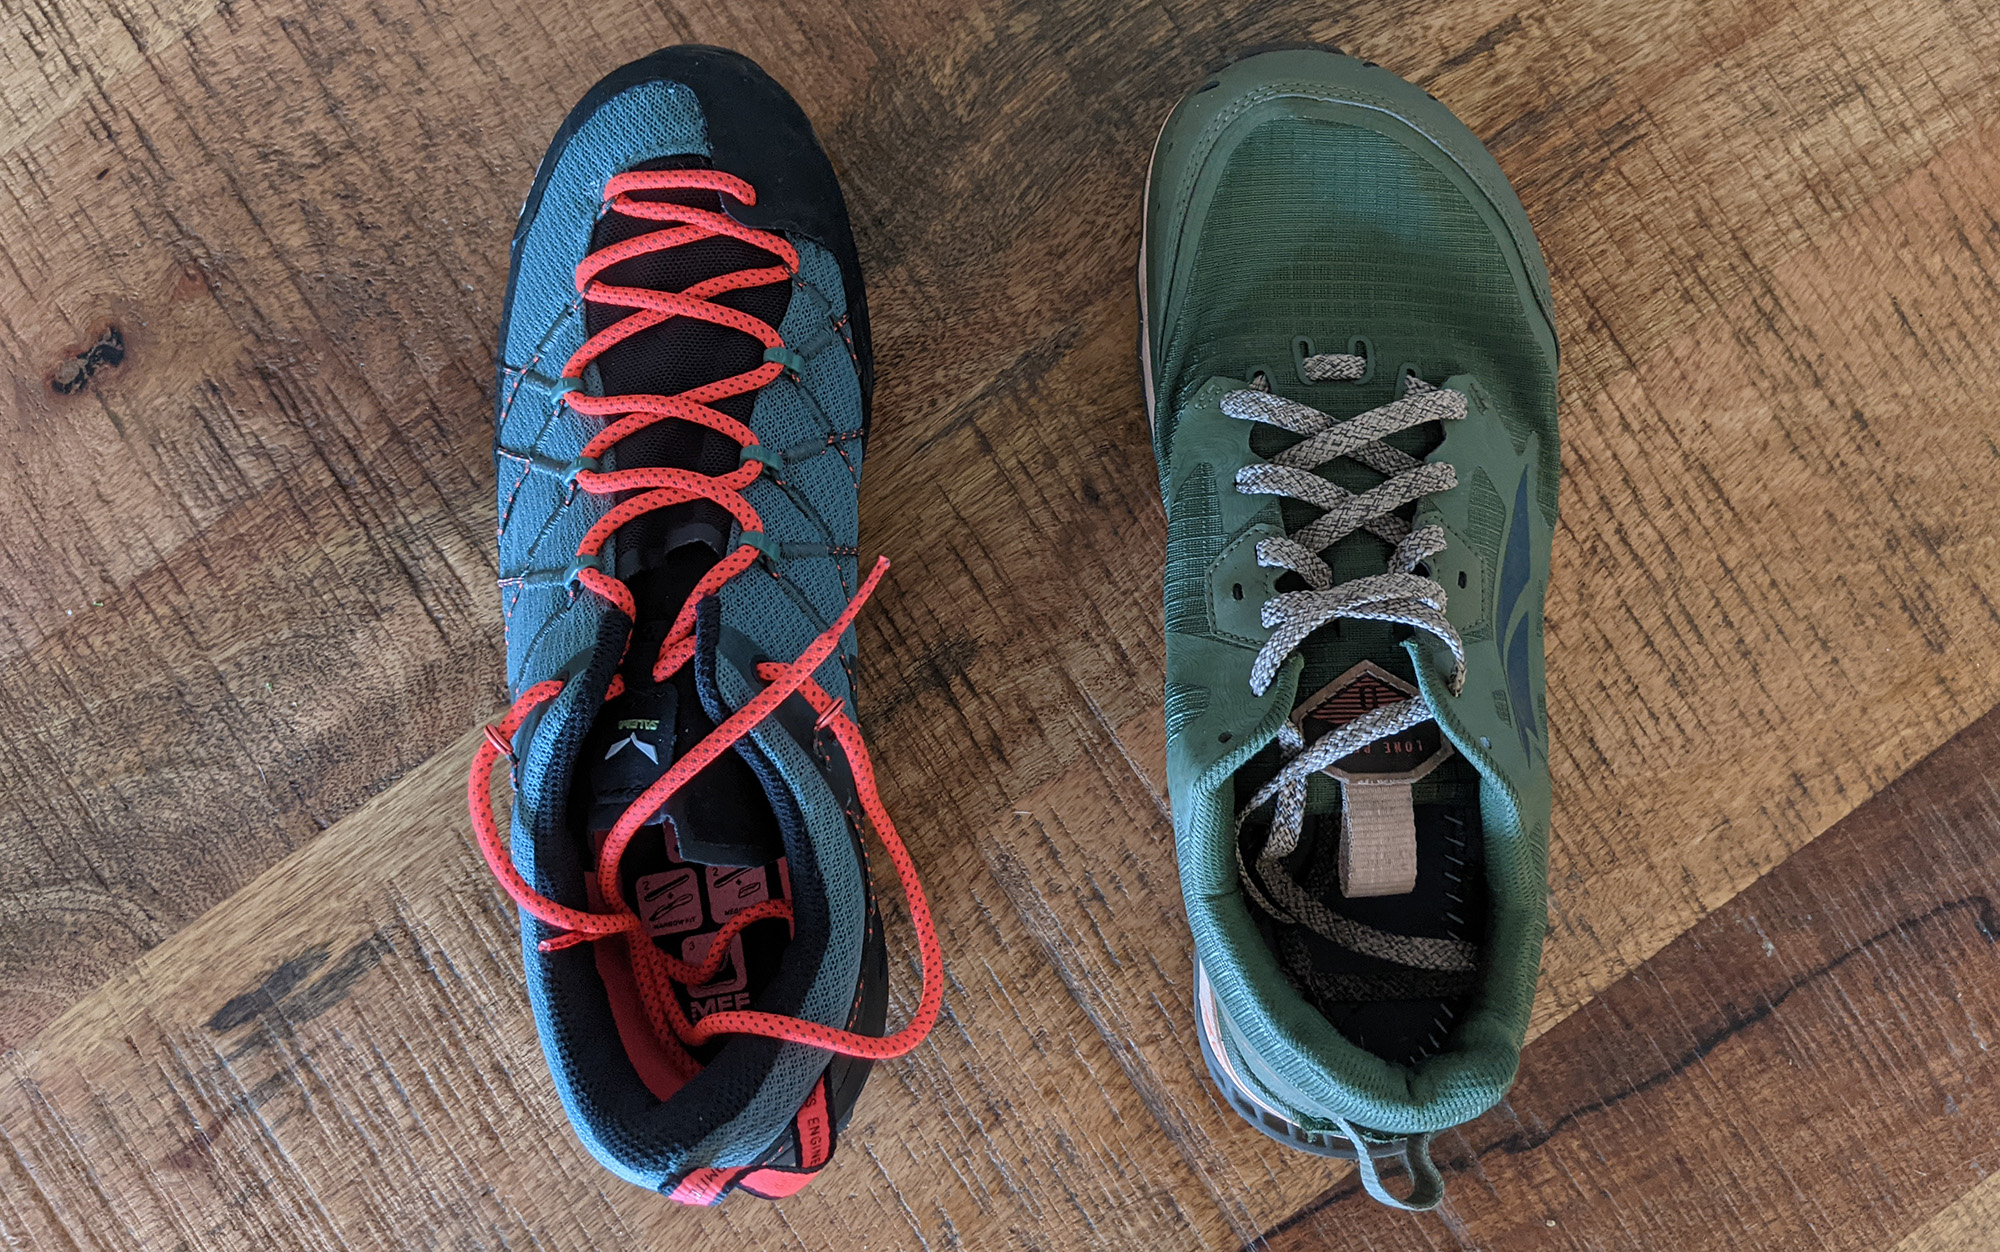 The Altra Lone Peak (right) next to Salewa Wildfire, an approach shoe with an unusually narrow toe box.